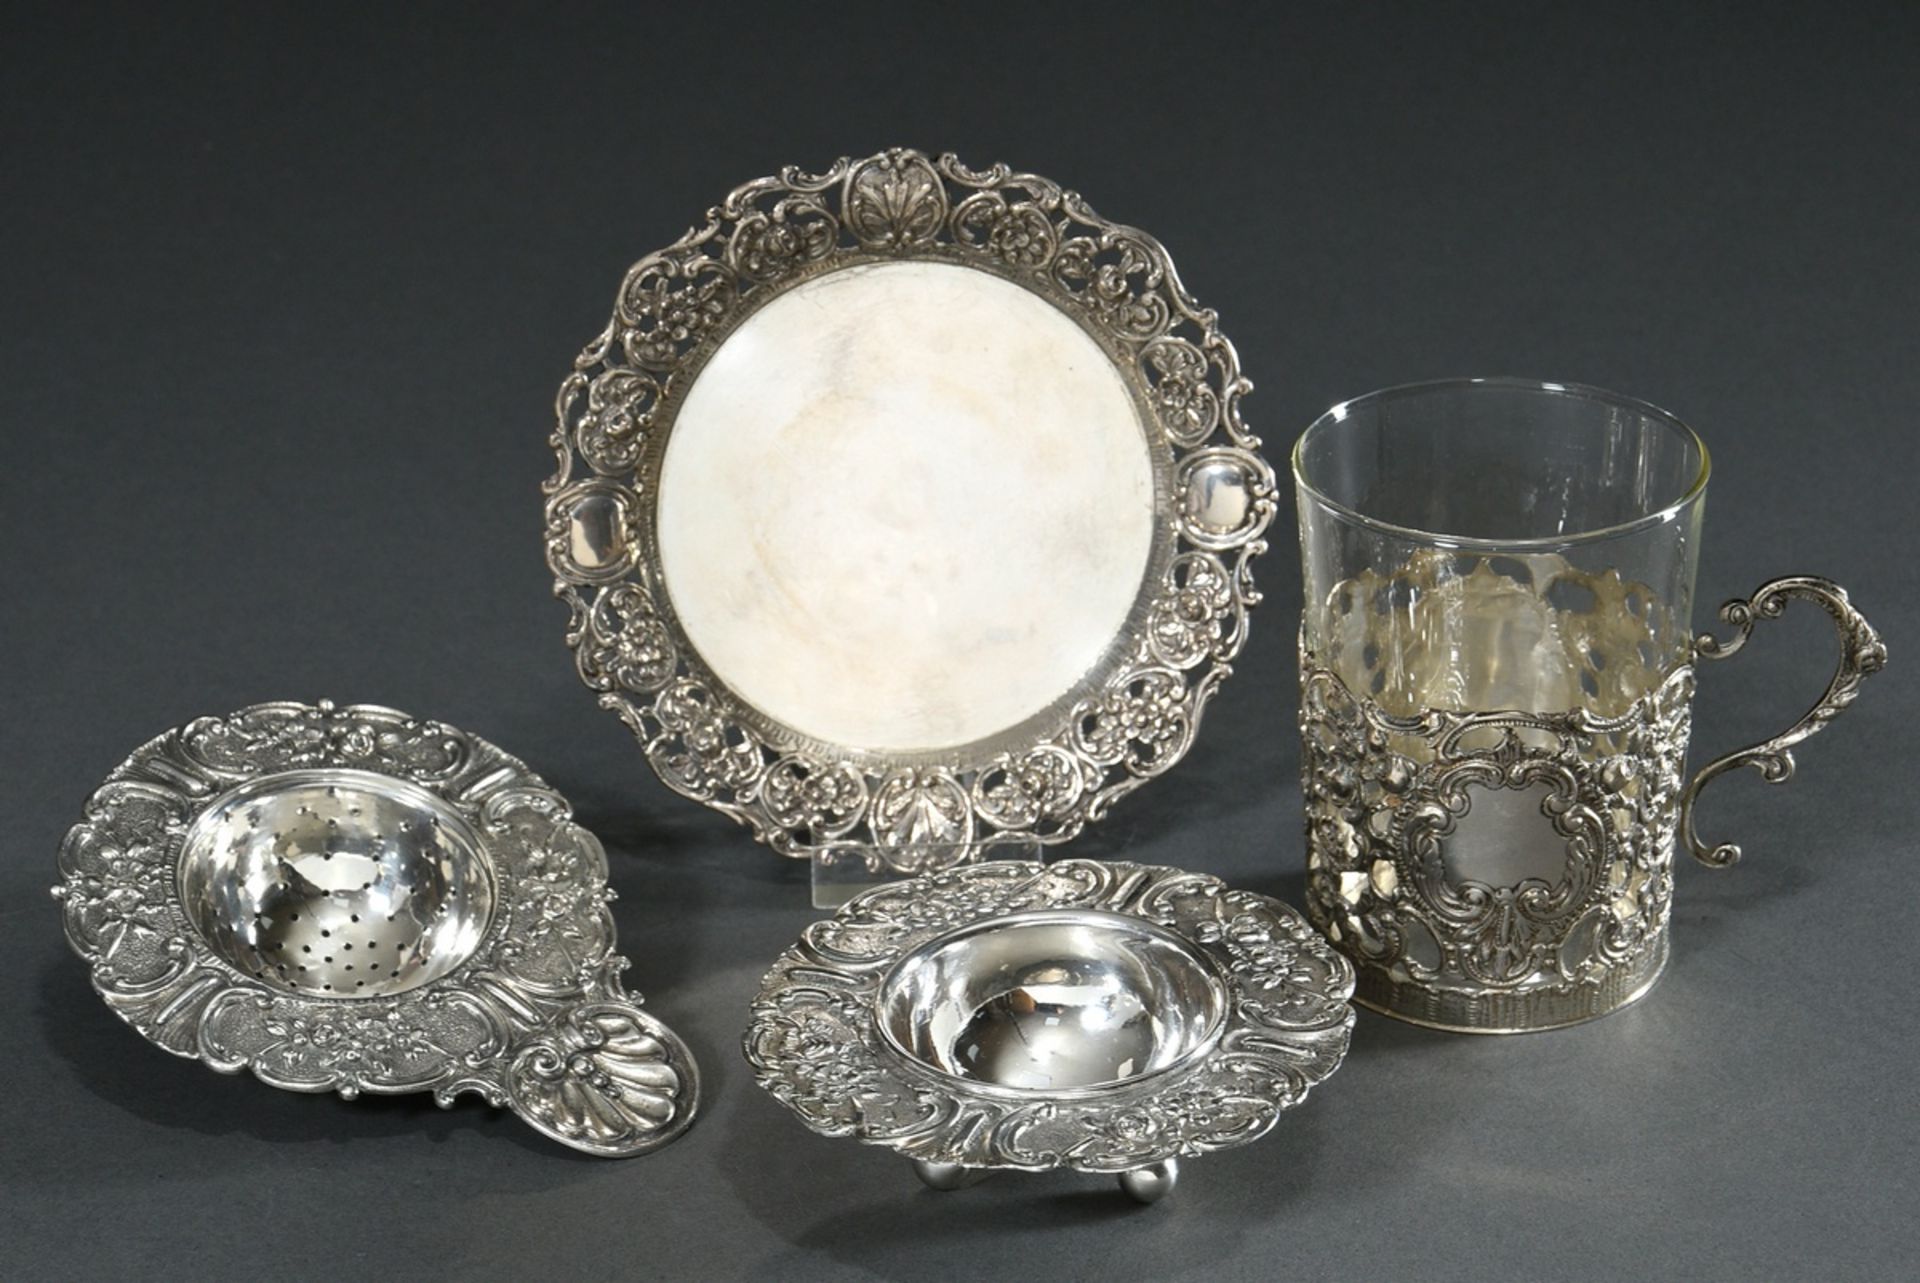 2 pieces richly reliefed tea glass on saucer and tea strainer on saucer "Roses and Rocailles", Germ